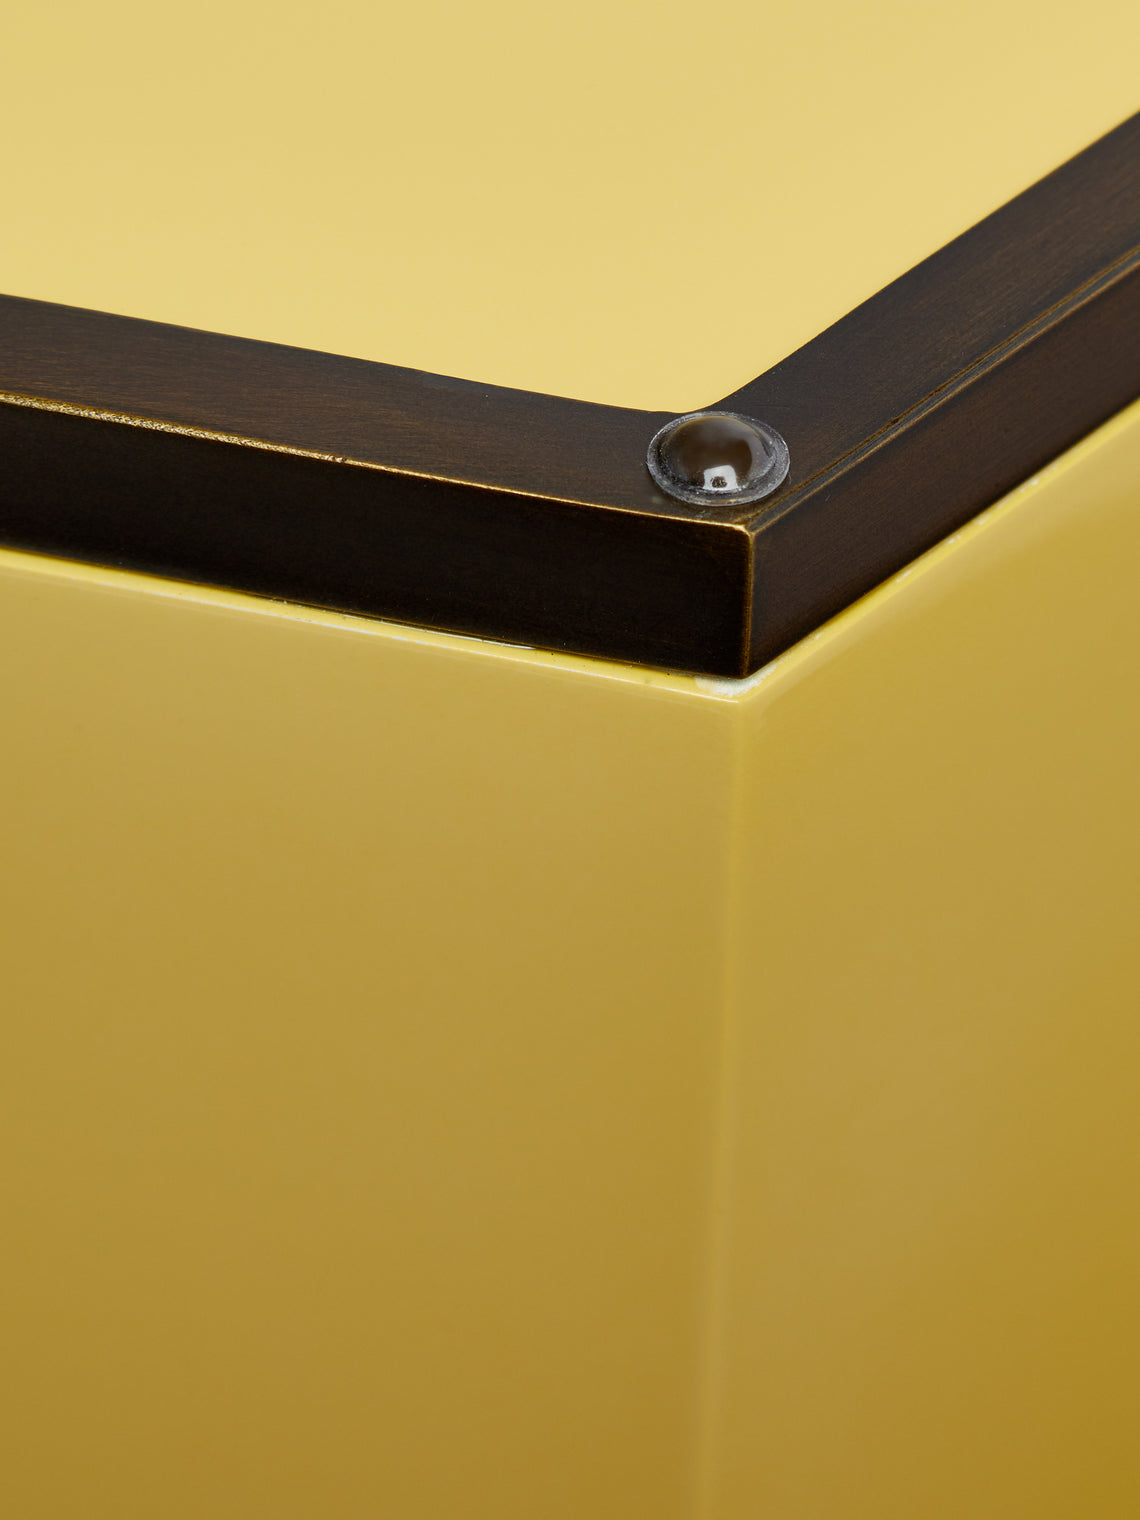 The Lacquer Company - Lacquered Hexagonal Bin -  - ABASK